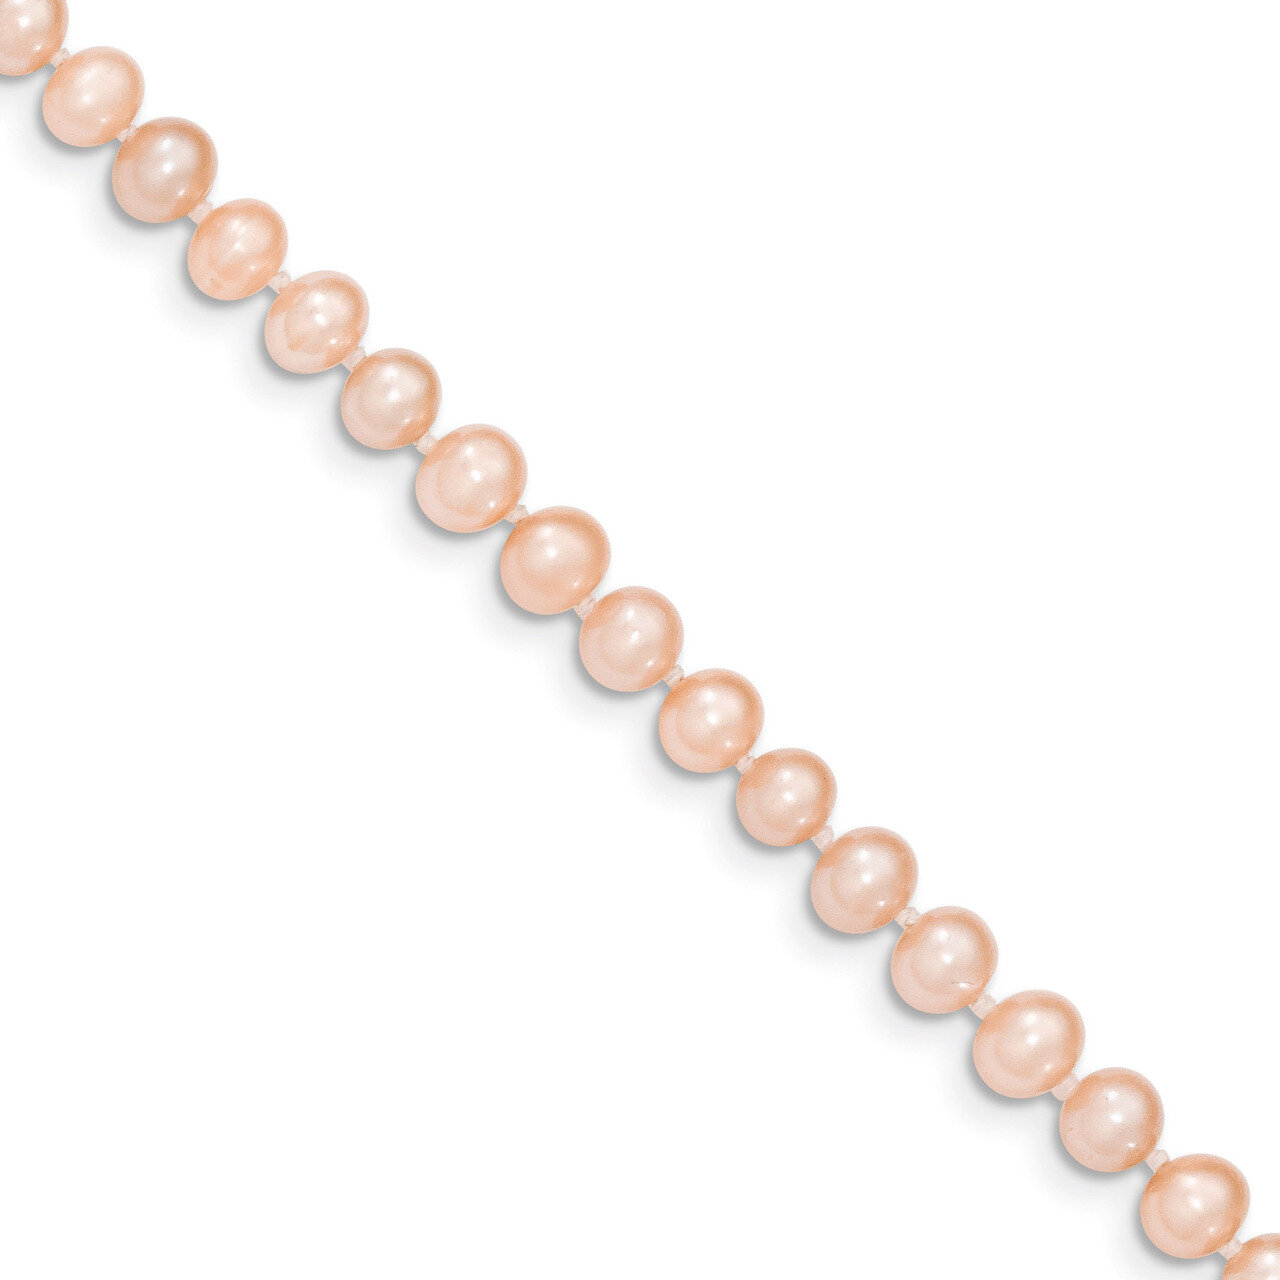 5-6mm Pink Cultured Near Round Pearl Necklace 16 Inch 14k Gold PPN050-16